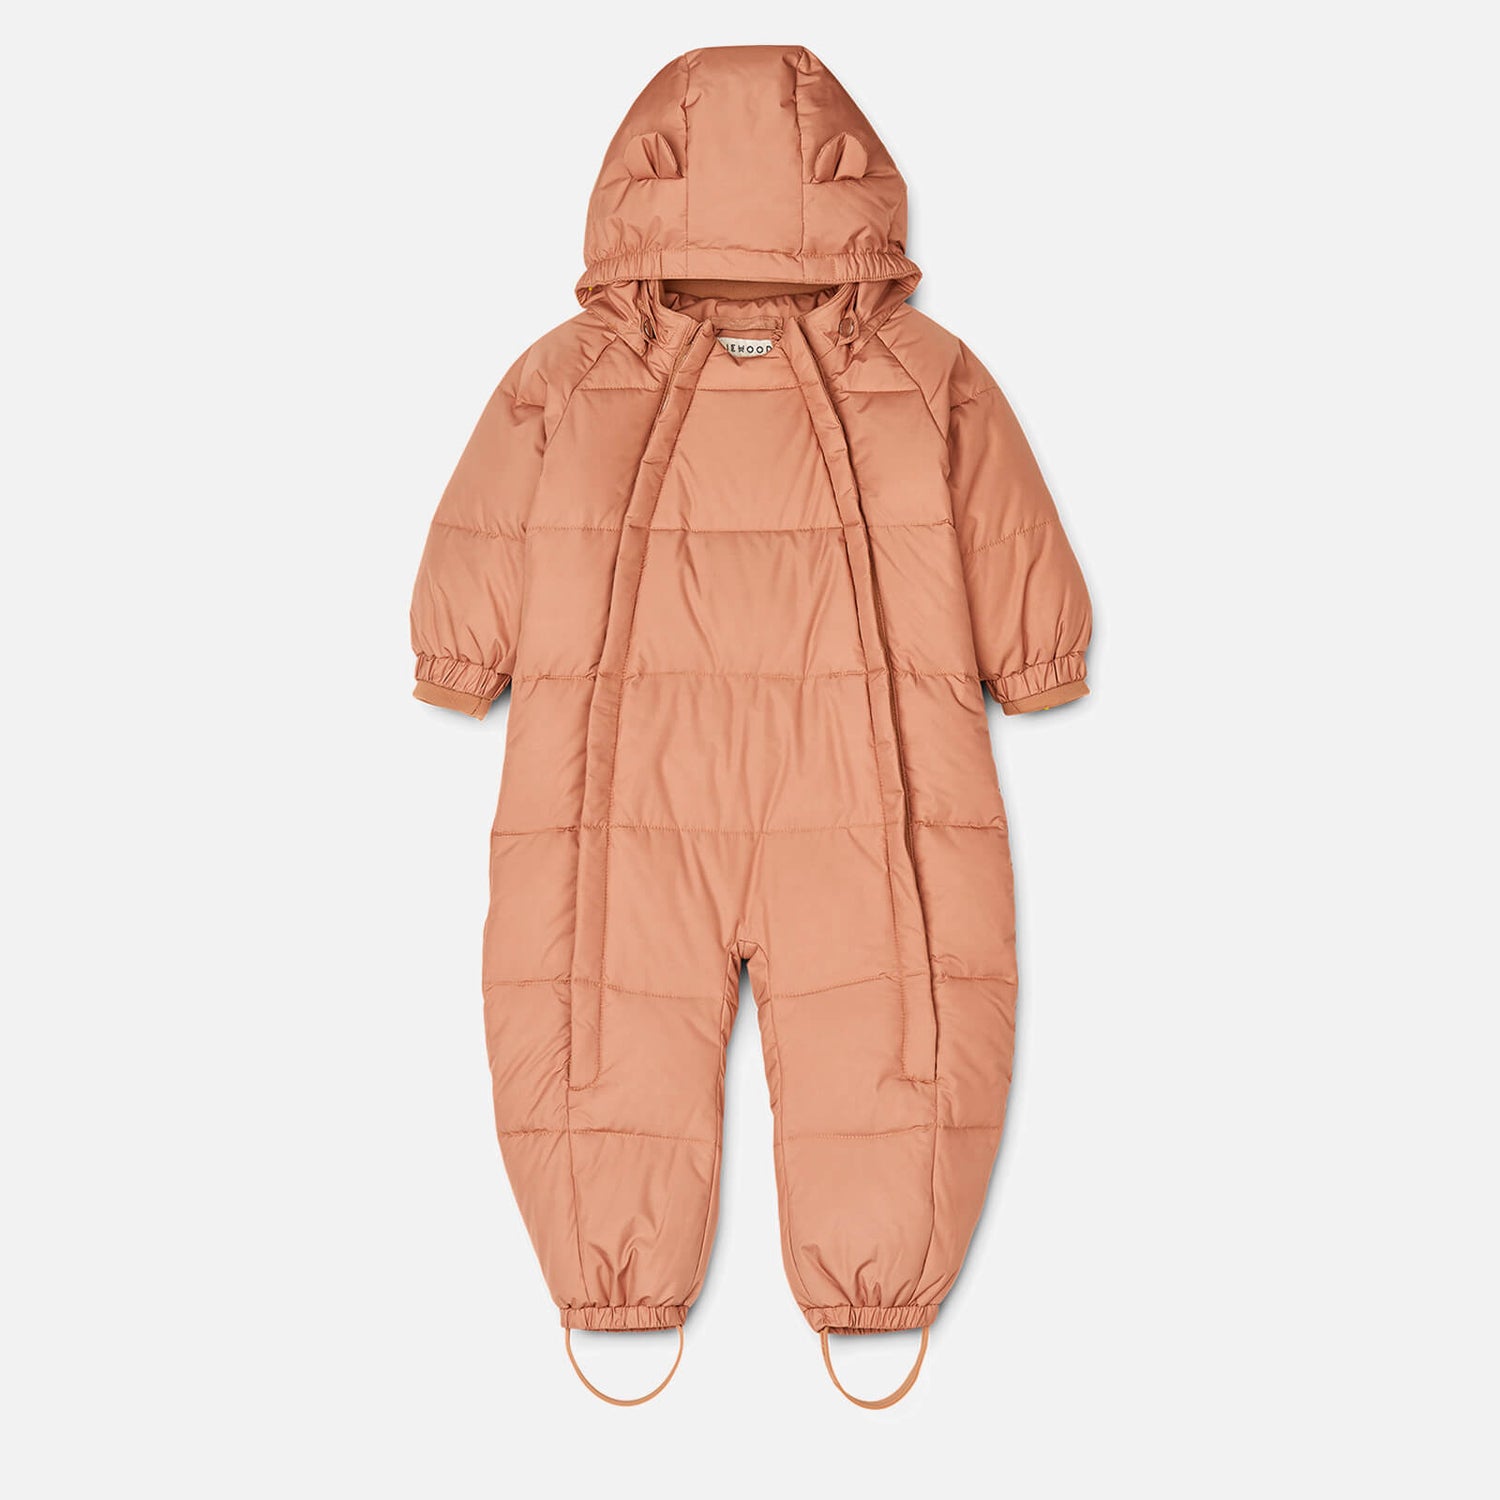 Liewood Baby Sylvie Shell Hooded Snowsuit - 6 Months